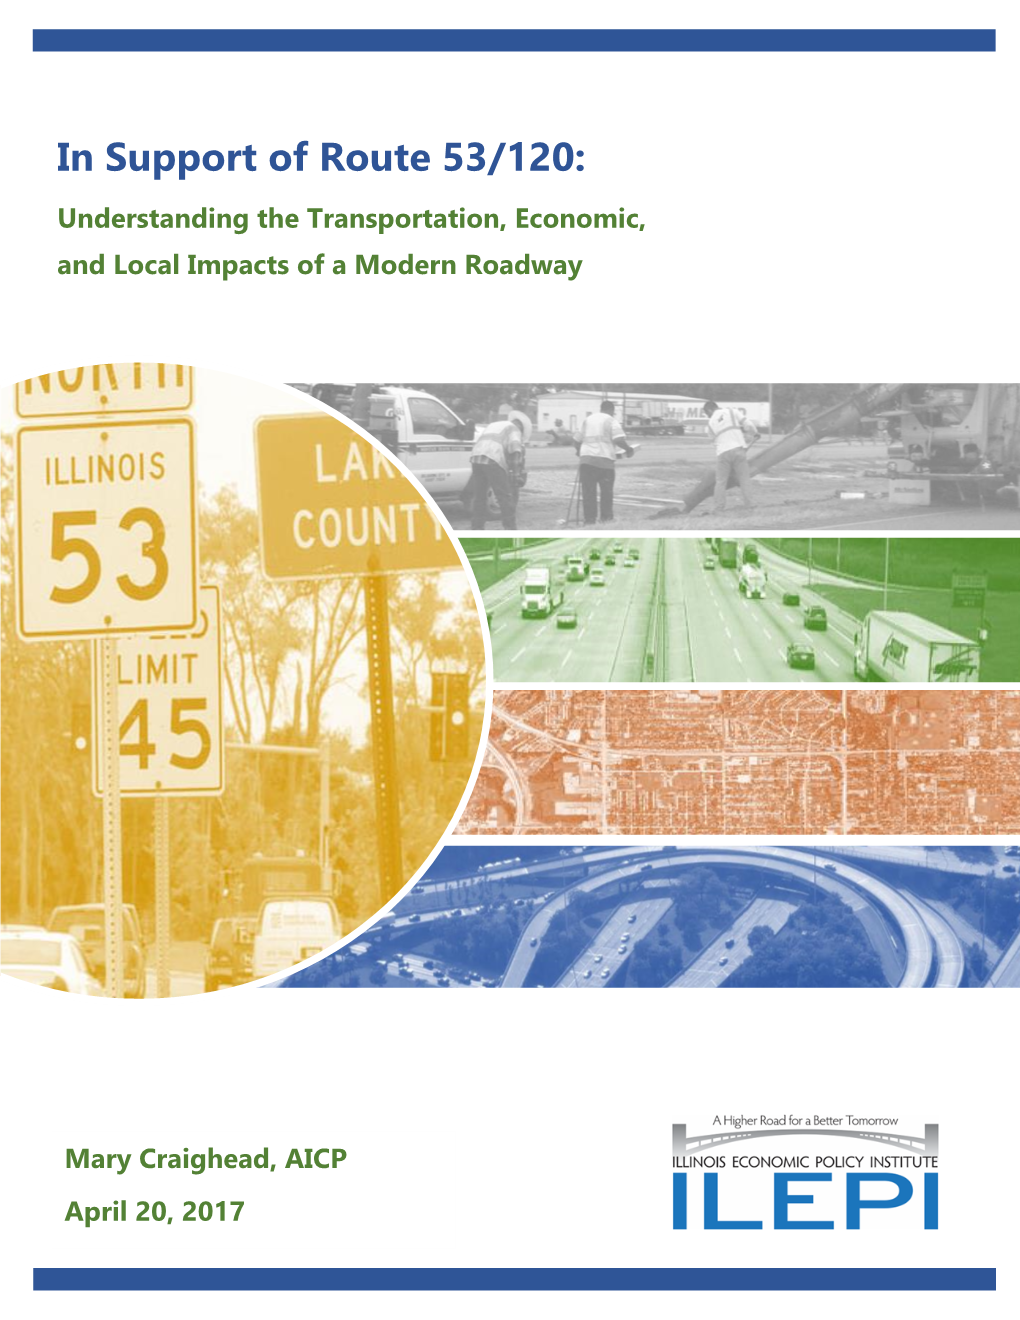 In Support of Route 53/120: Understanding the Transportation, Economic, and Local Impacts of a Modern Roadway